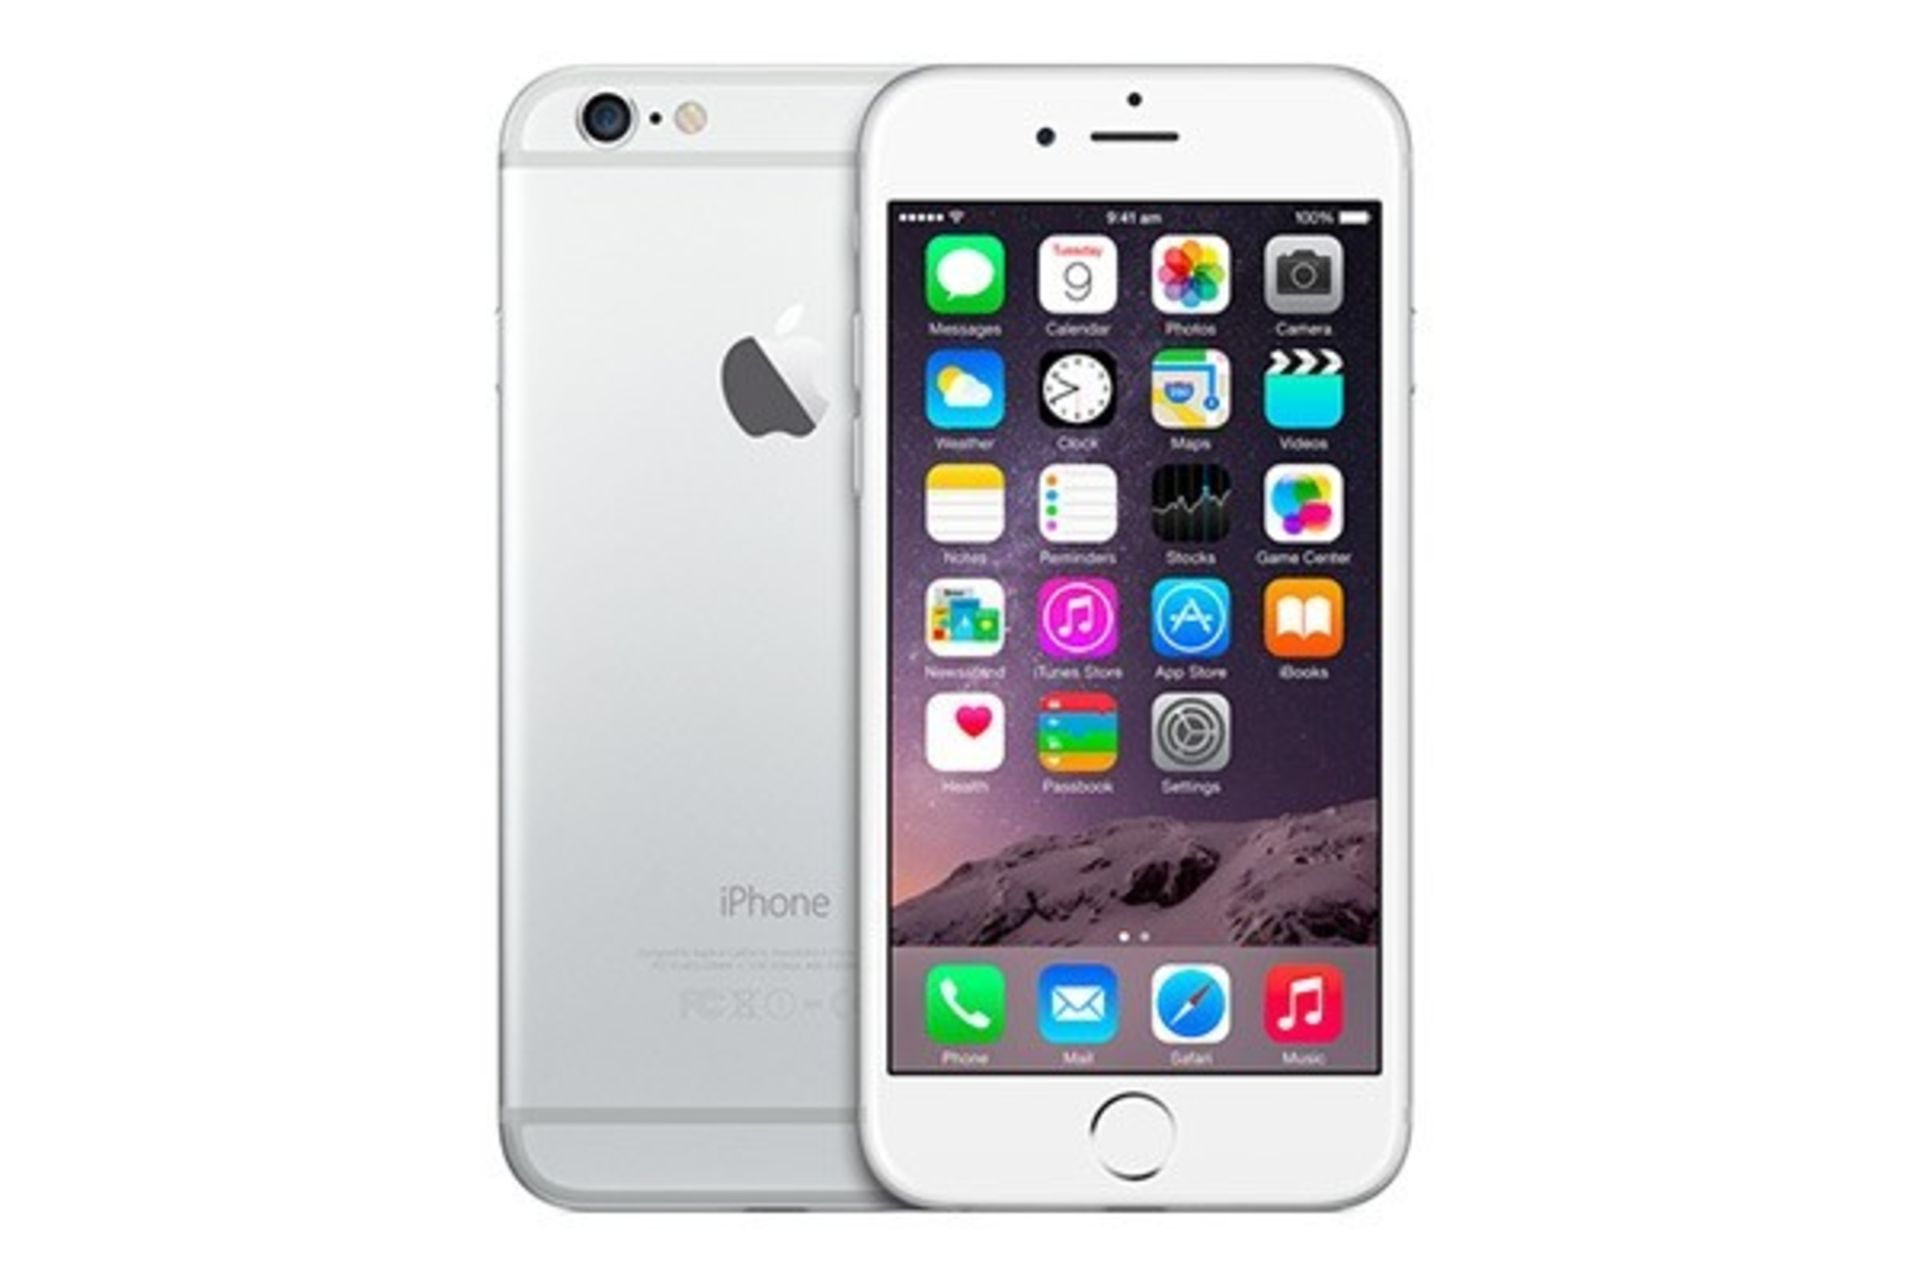 1 x Apple iPhone 6 16GB - Silver. Unlocked - Any Network. Apple Refurbished - As New Condition. - Image 3 of 4